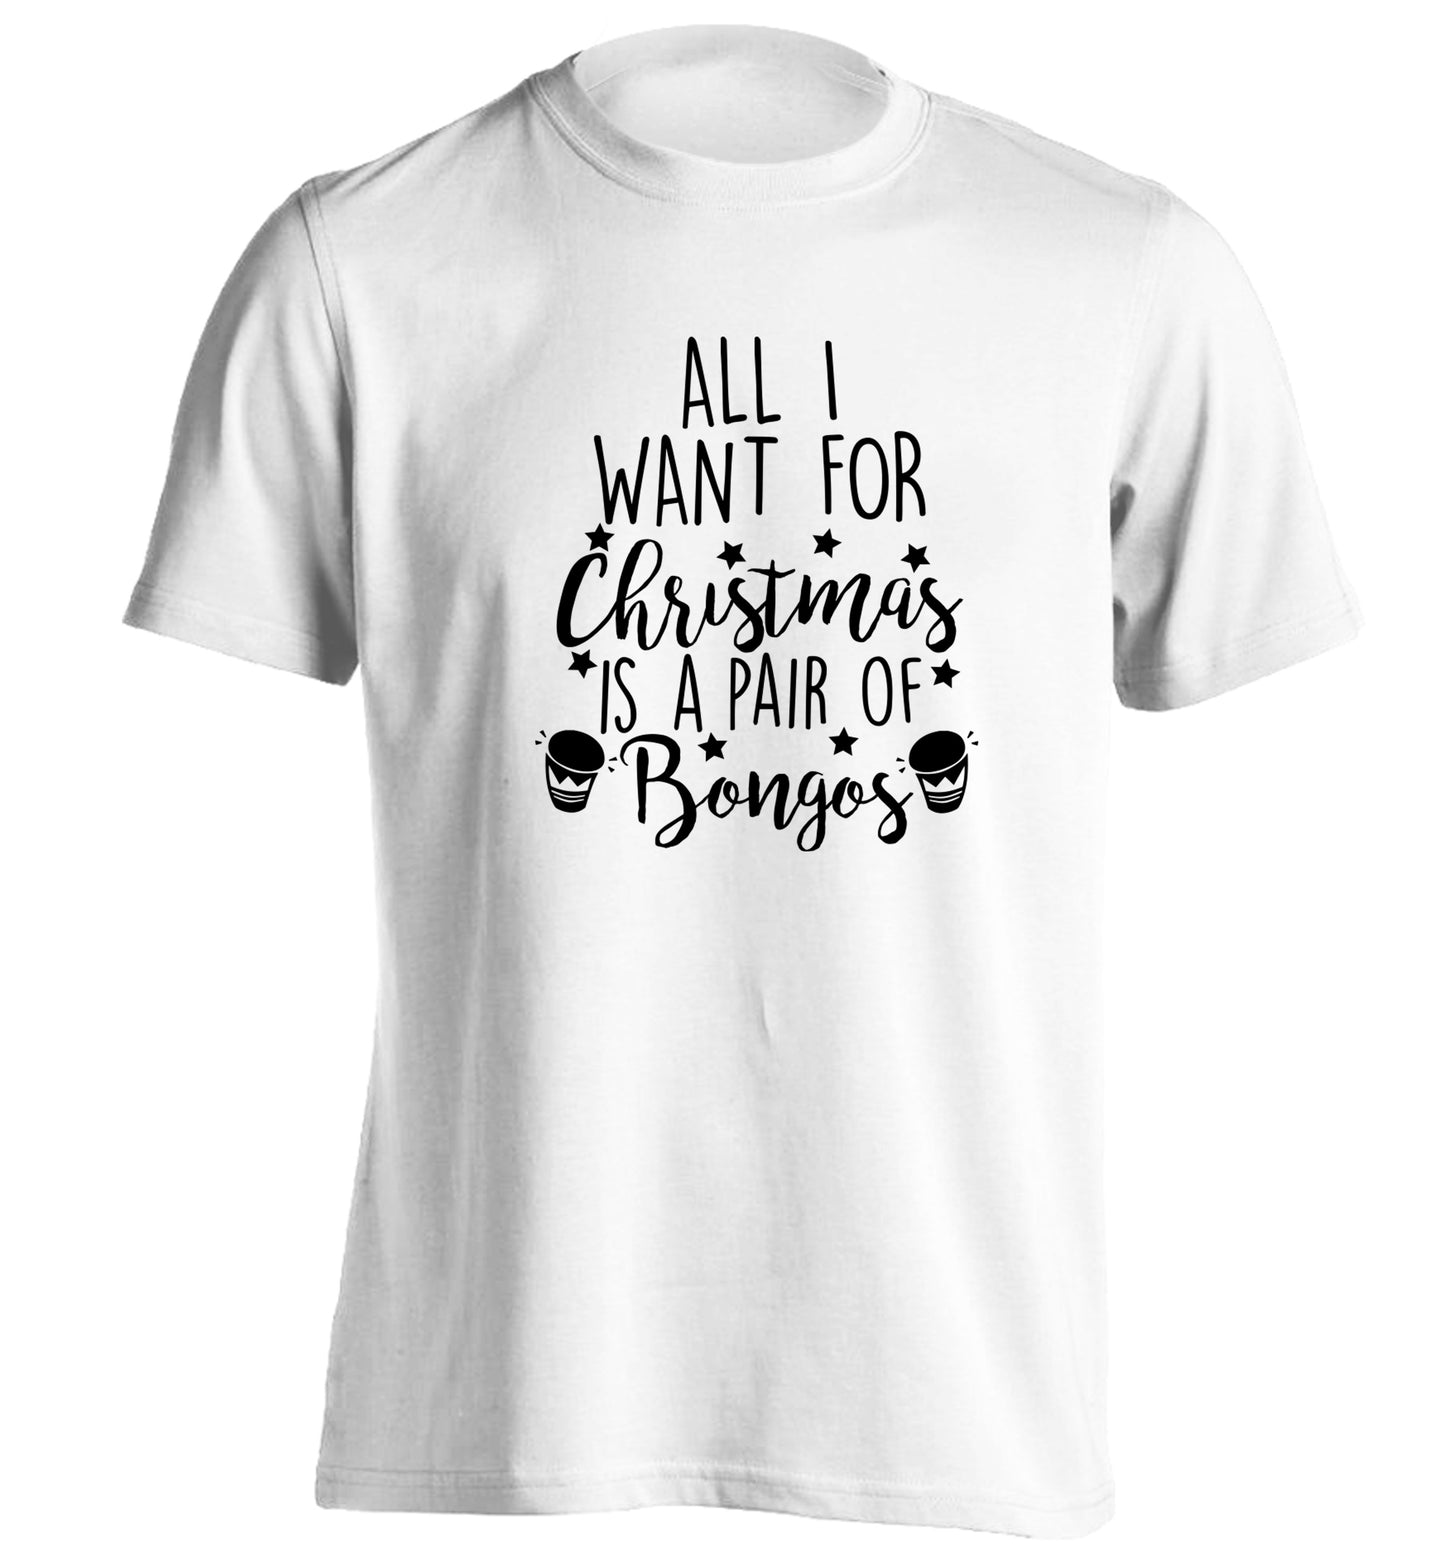 All I want for Christmas is a pair of bongos! adults unisex white Tshirt 2XL